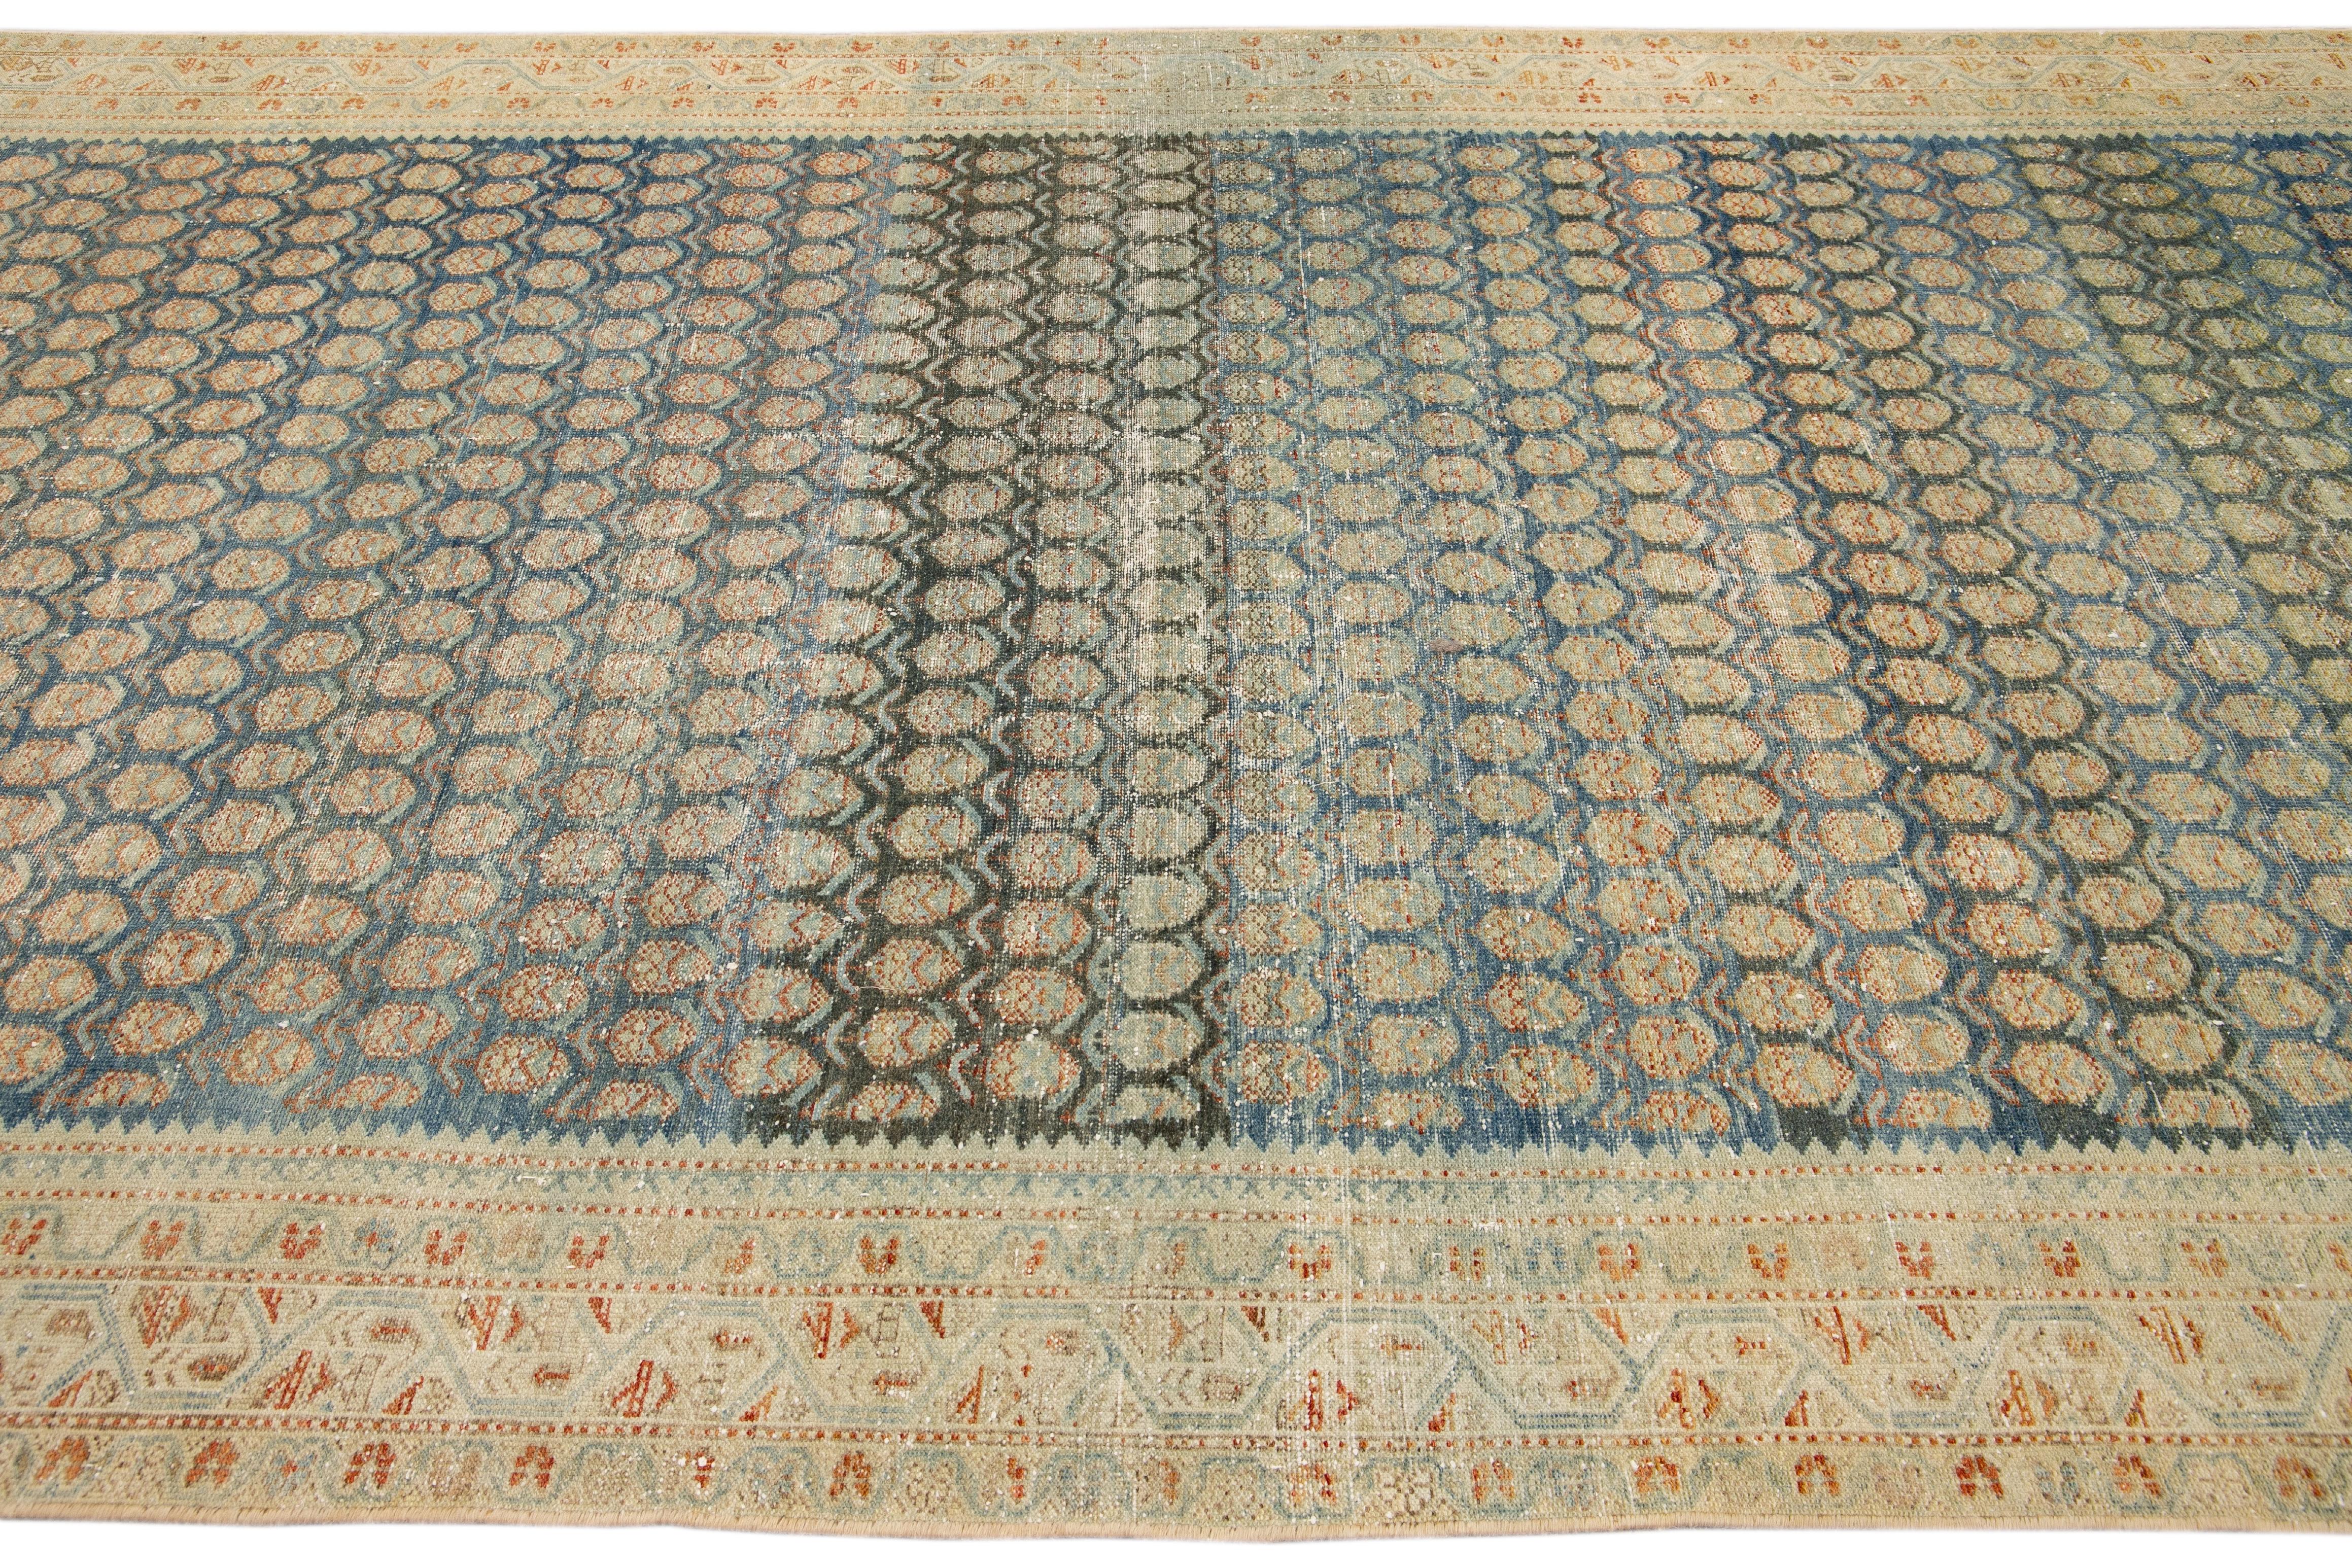 Antique Malayer Blue Handmade Allover Designed Oversize Wool Rug In Good Condition For Sale In Norwalk, CT